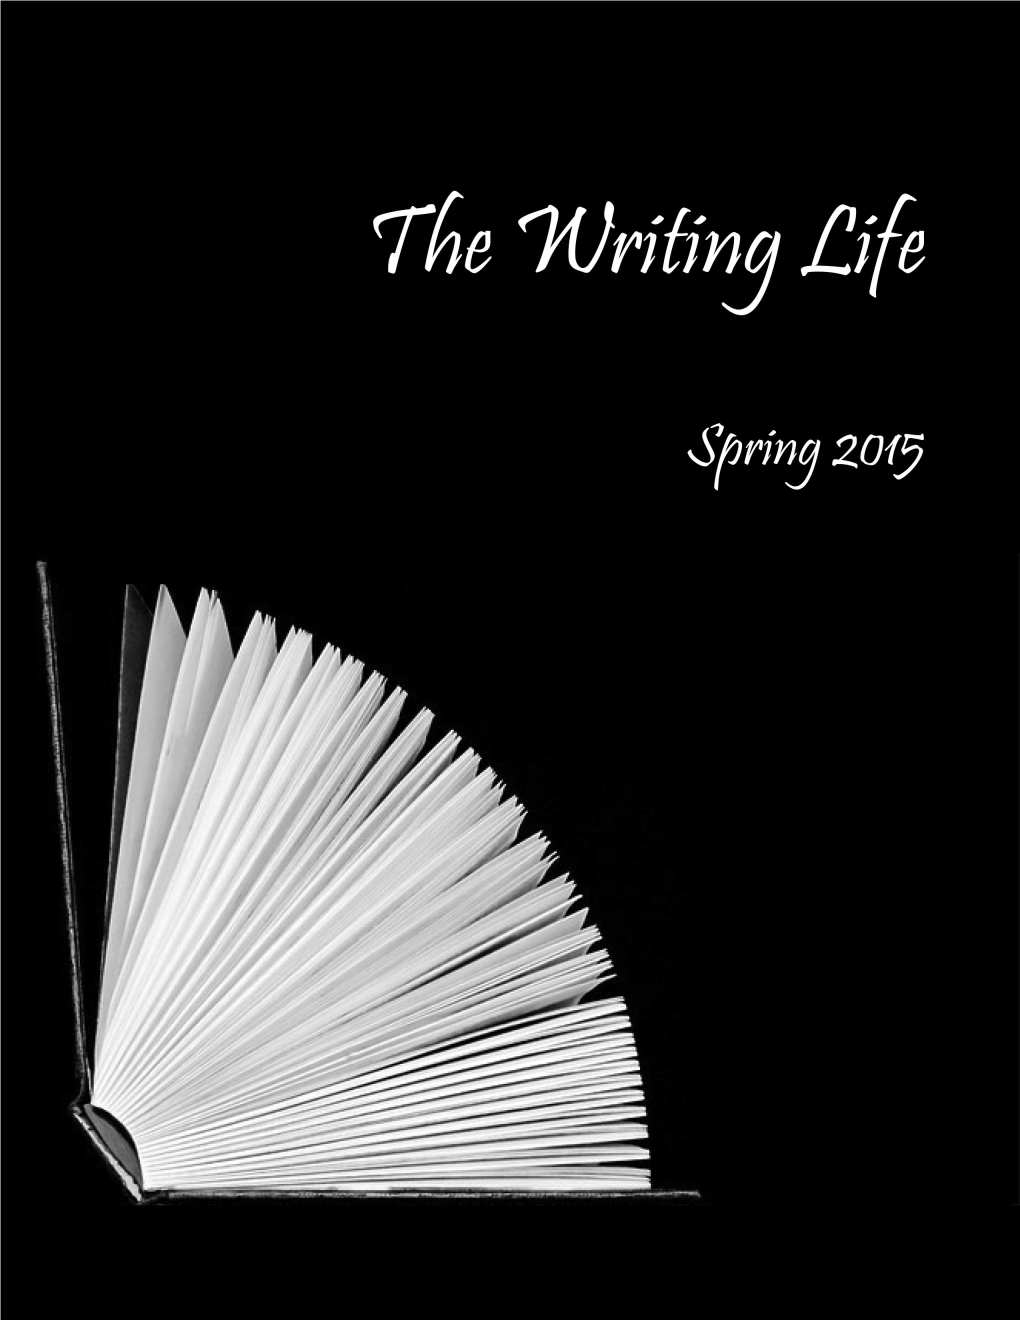 The Writing Life Spring 2015 2 I Never Left the Band, Too Stubborn and Loyal to Give up Be Musicians, Usually Falling Short on One Side of the Spectrum